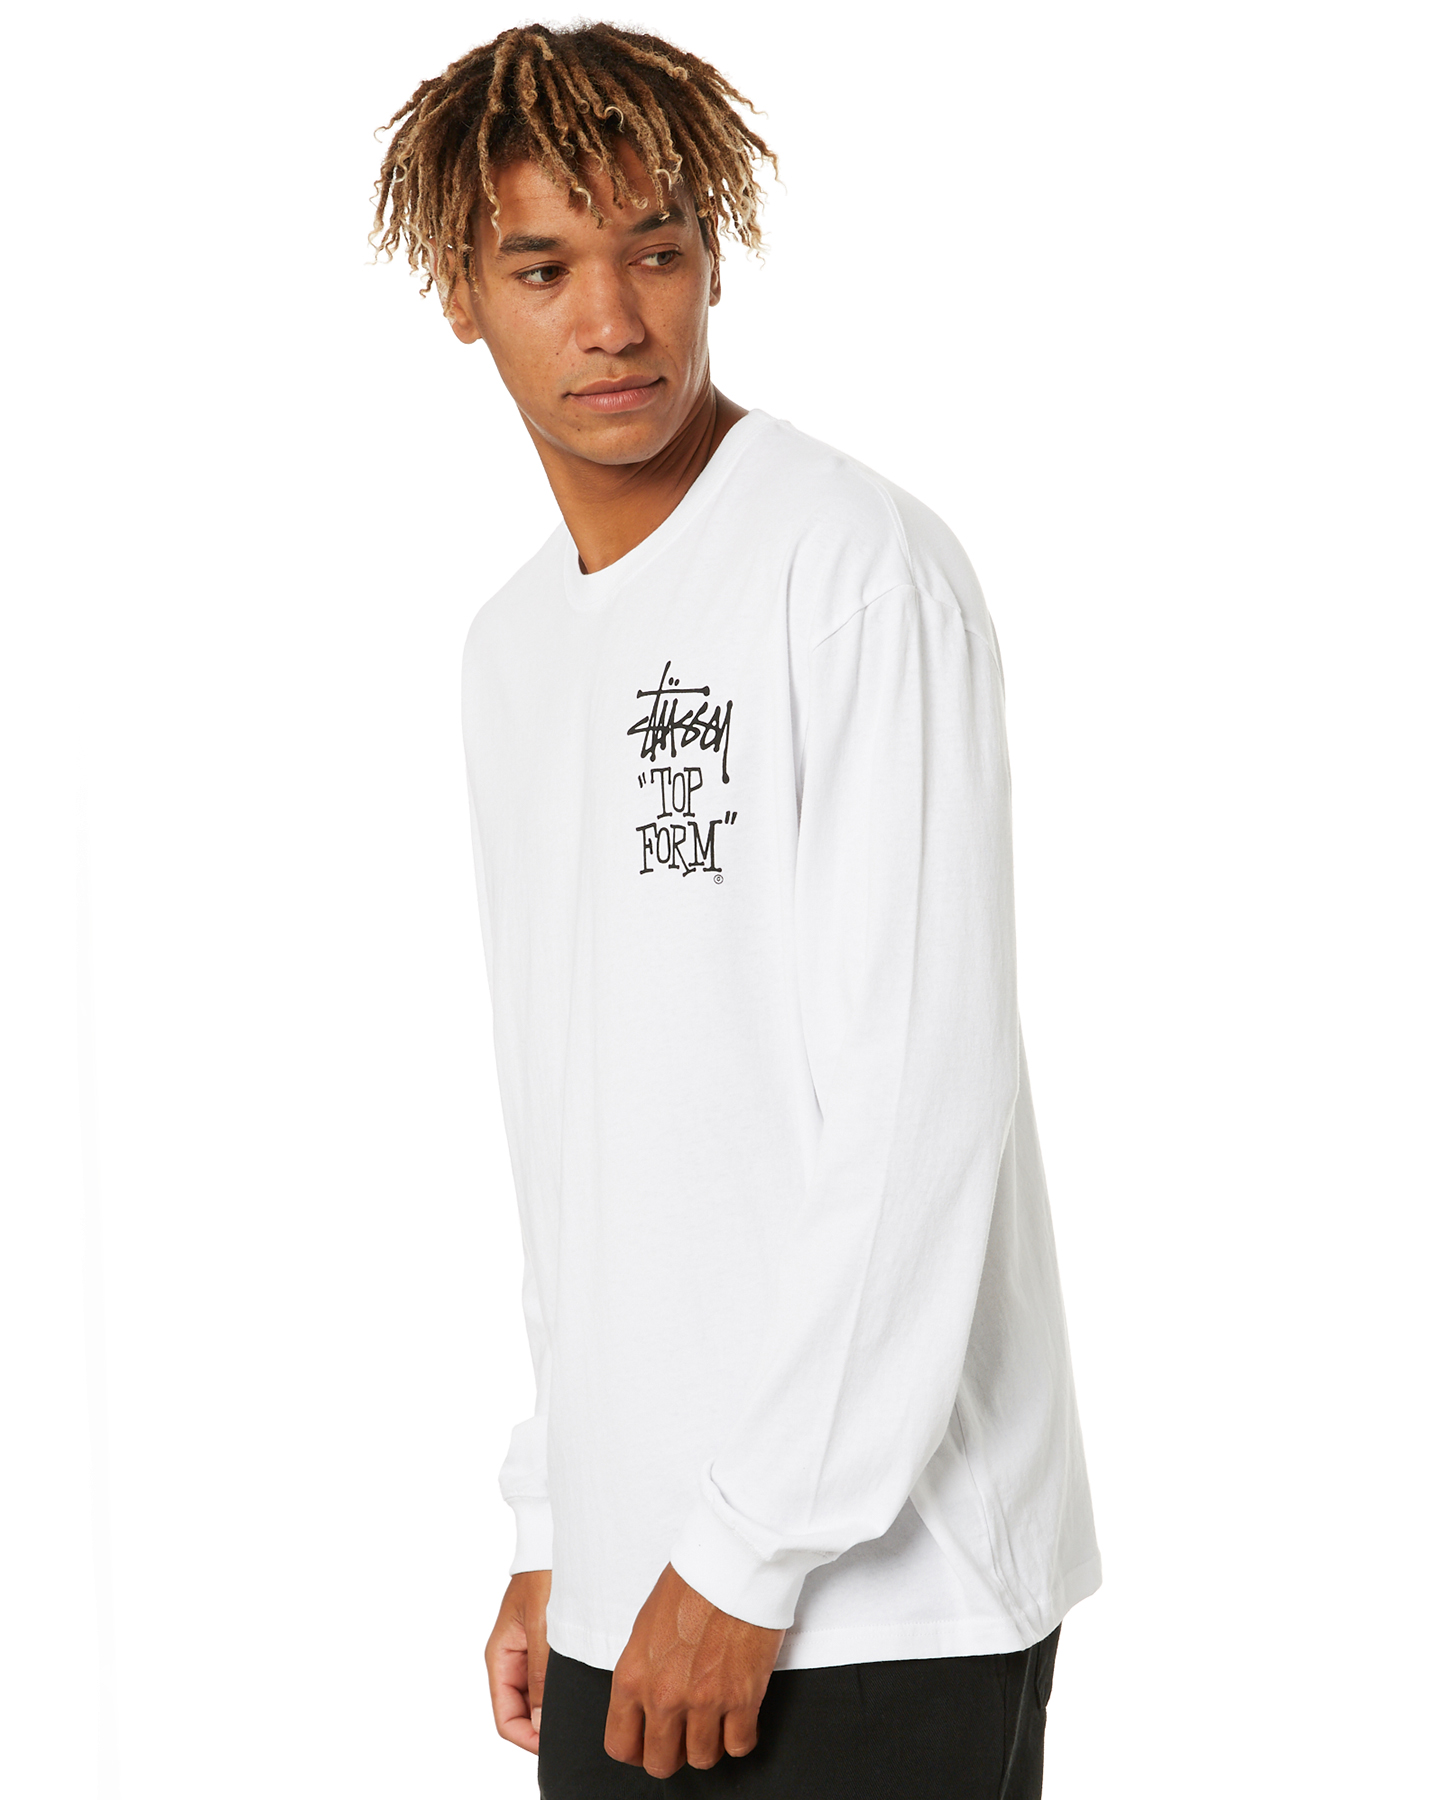 Stussy Top Form Mens Ls Tee - White | SurfStitch